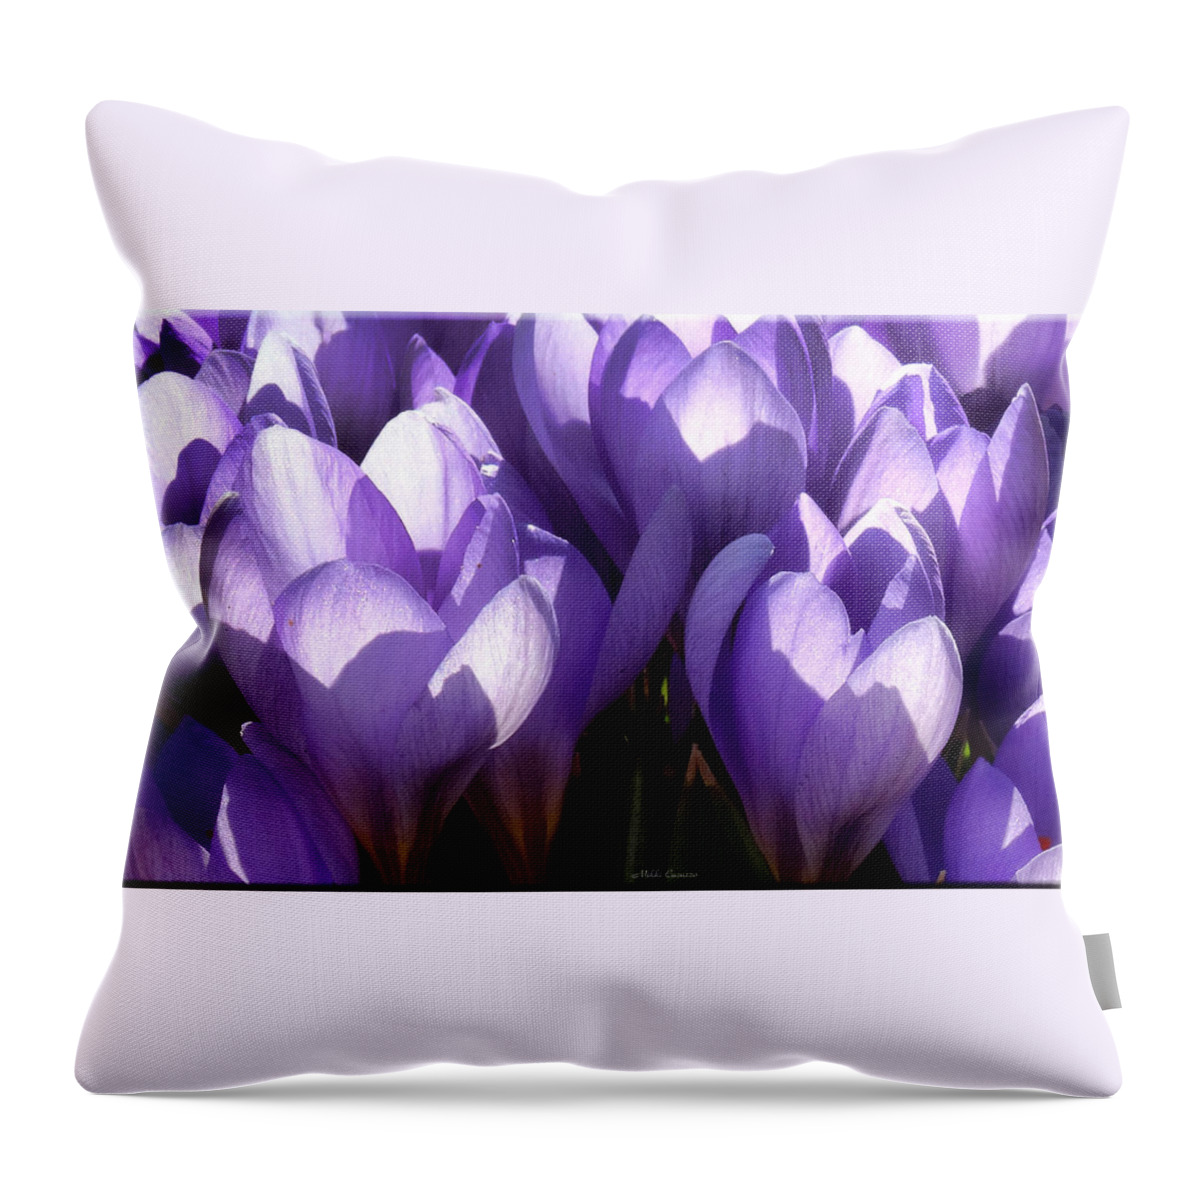 Floral Throw Pillow featuring the photograph Early Crocus by Mikki Cucuzzo